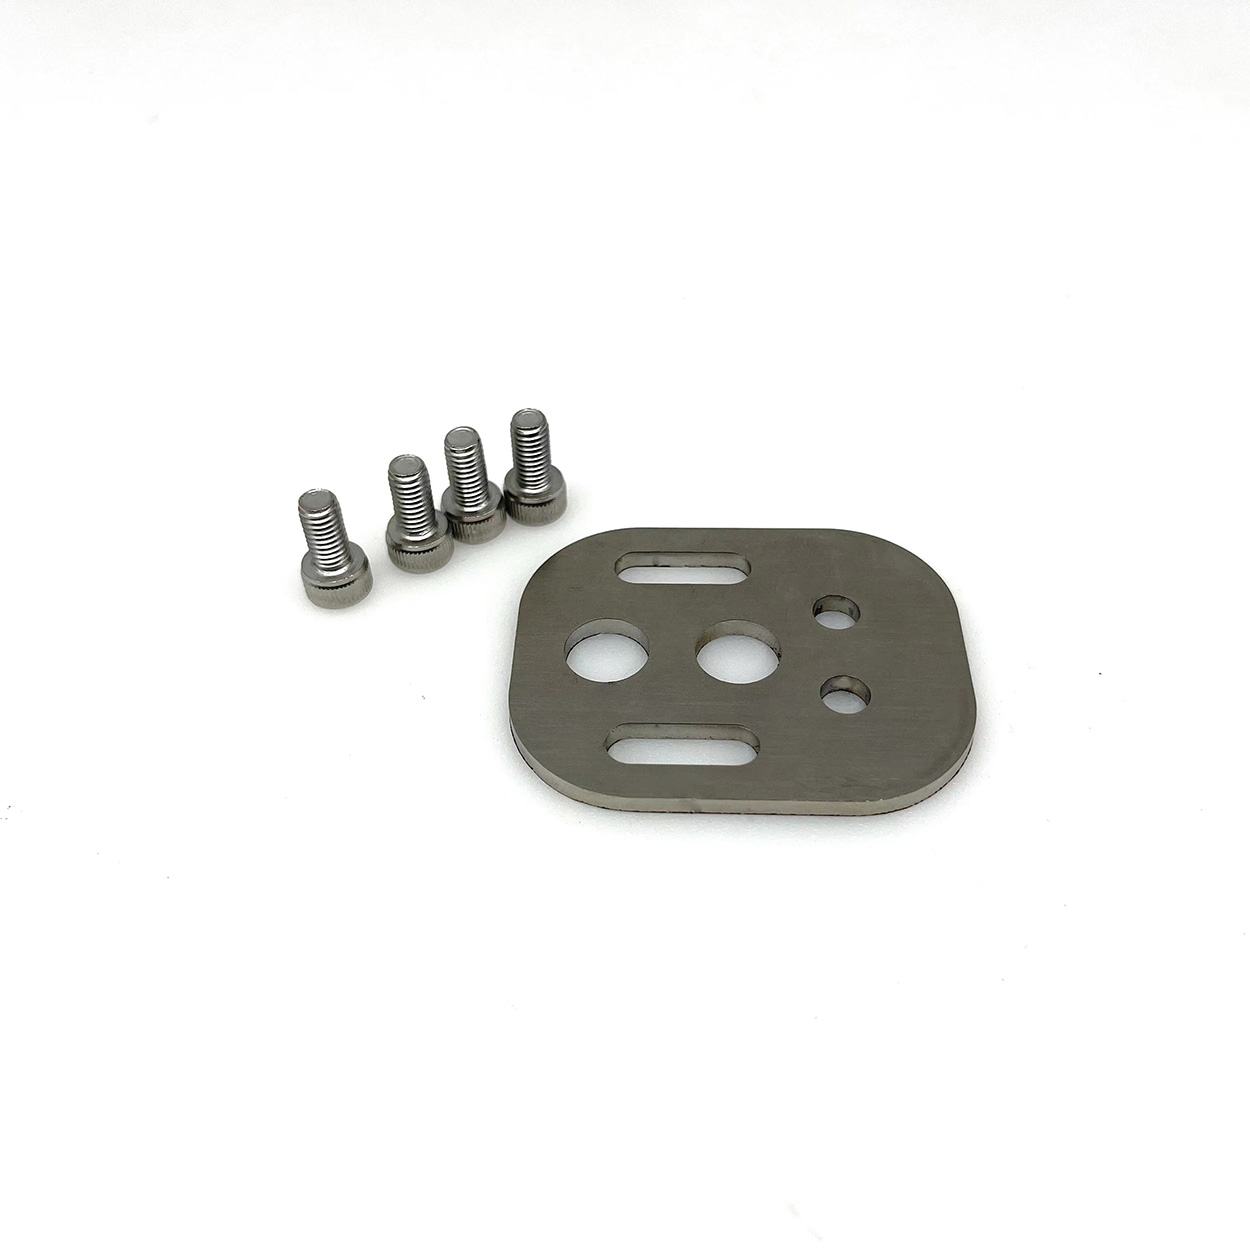 NS10-A flex arm adaptor plate for NS10 tray